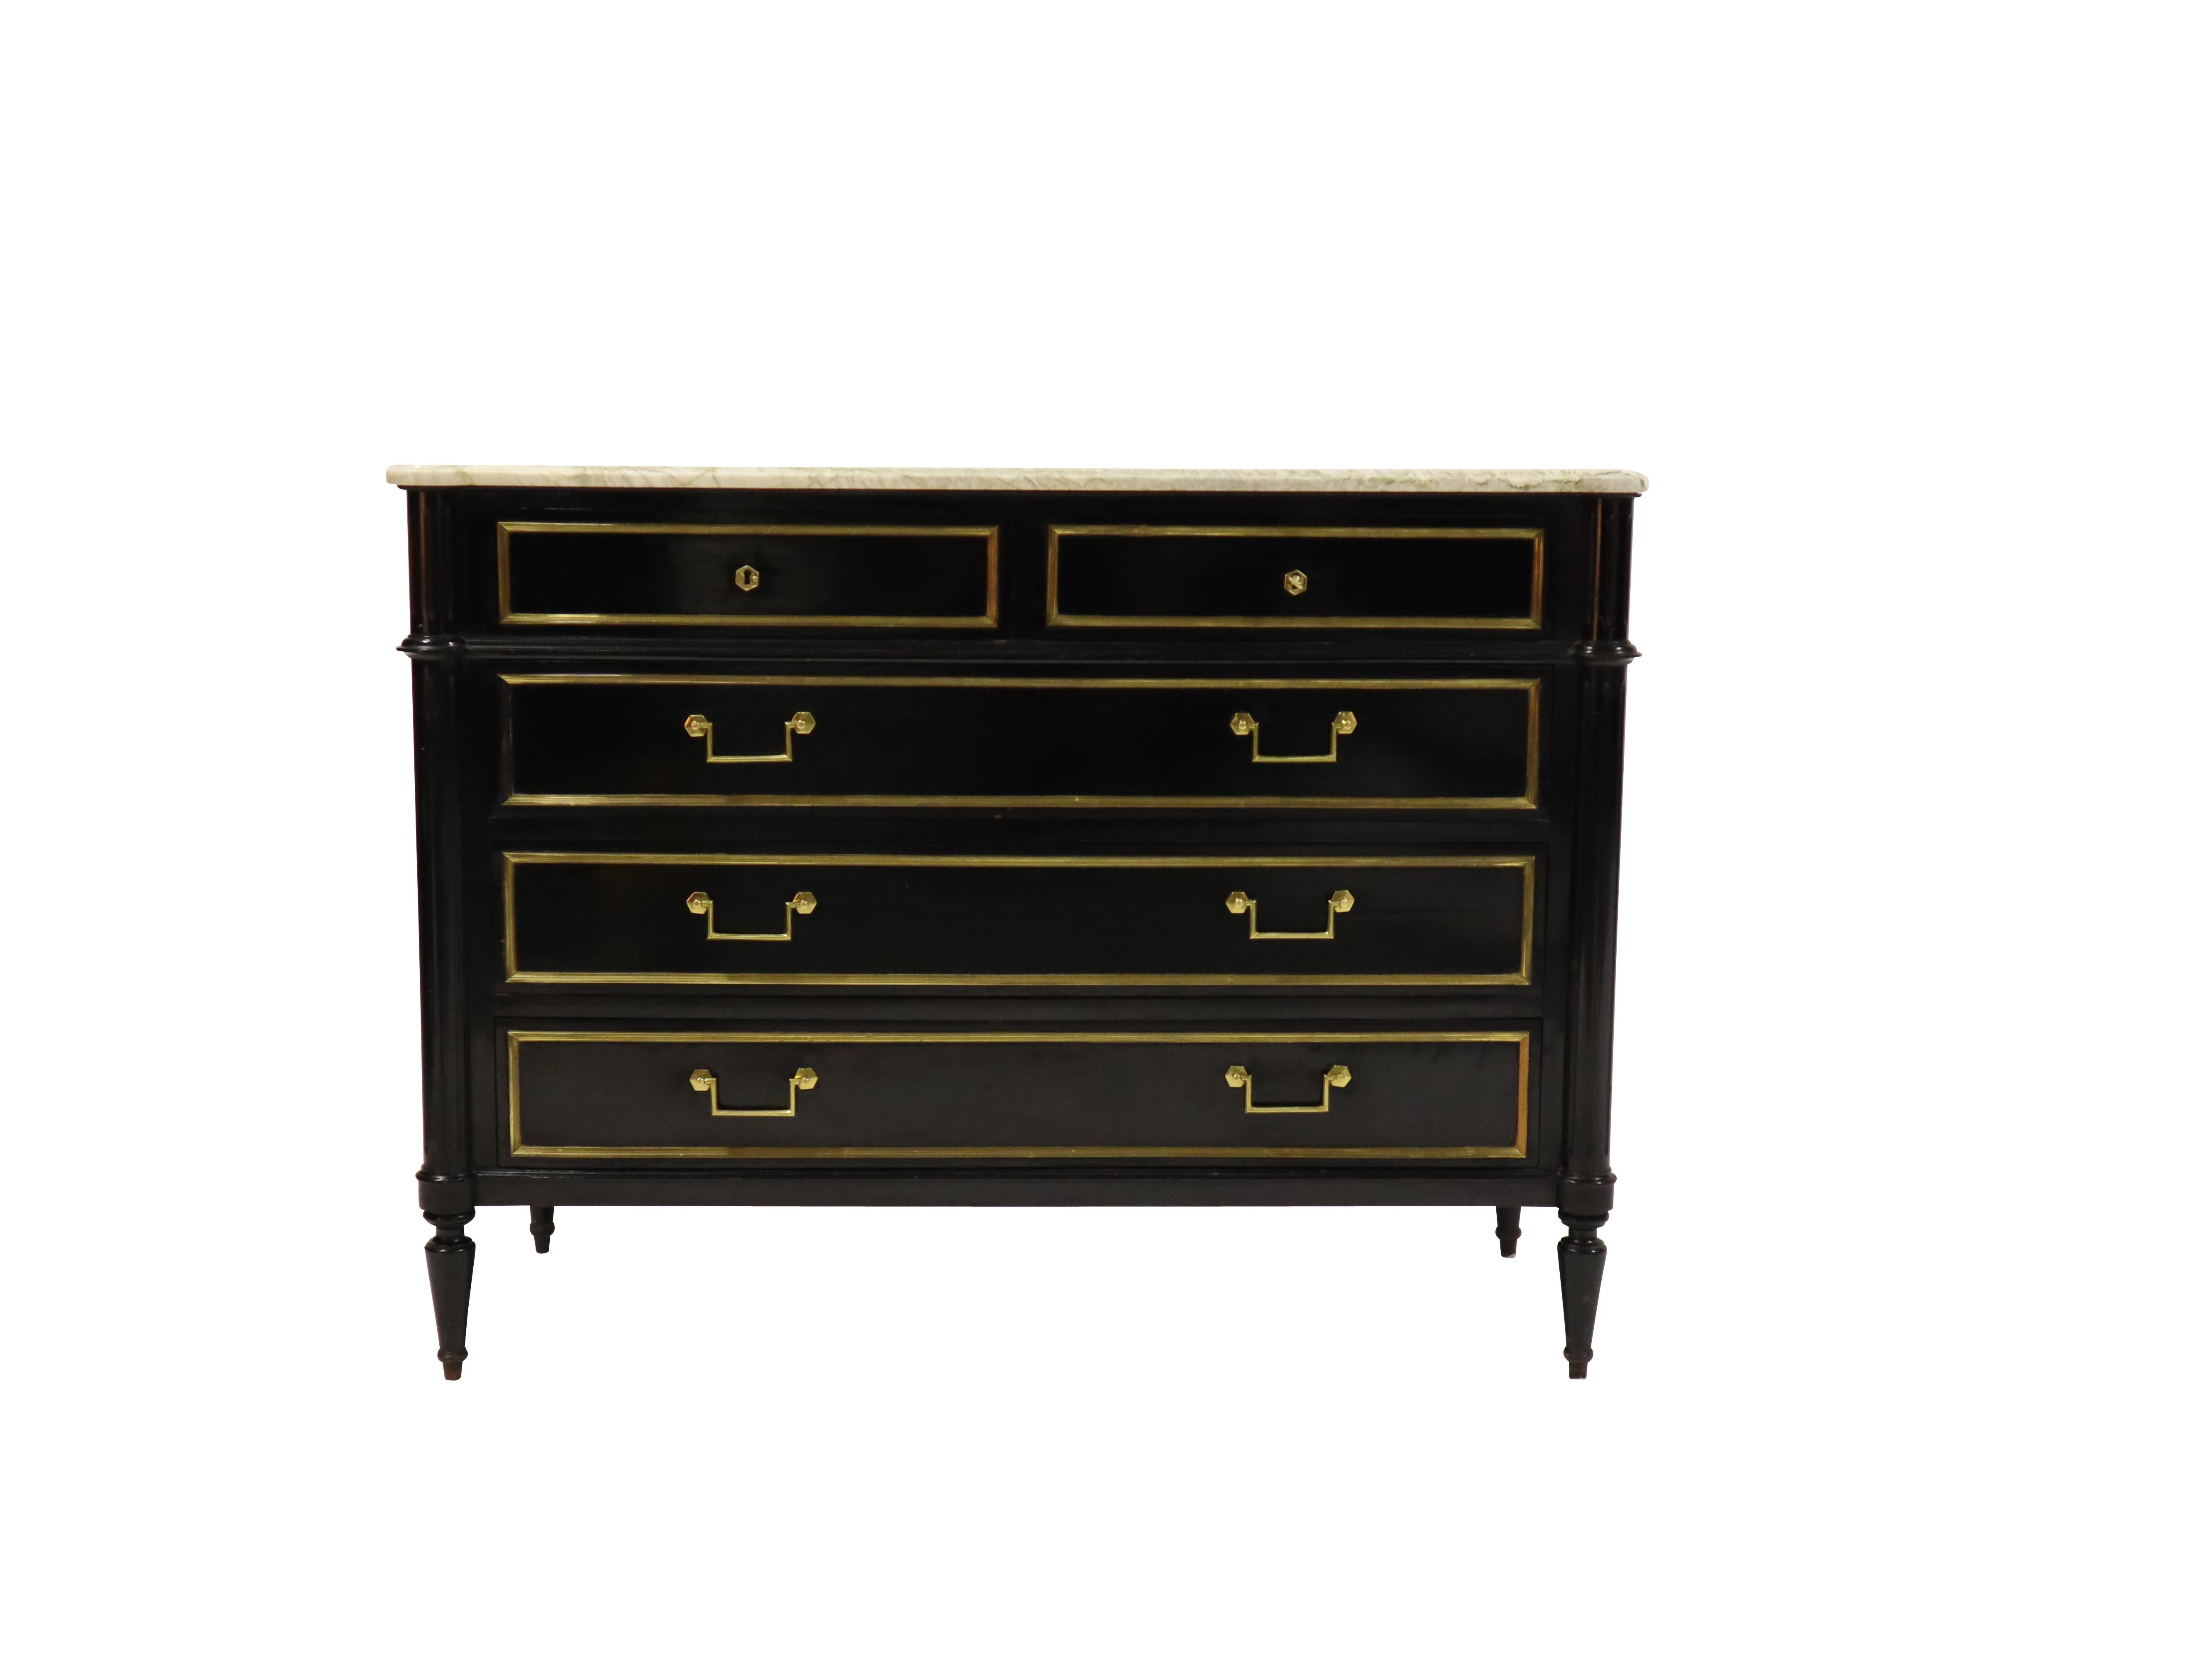 French chest attributed to Maison Jansen. Ebonized wood with brass trim details and marble top.